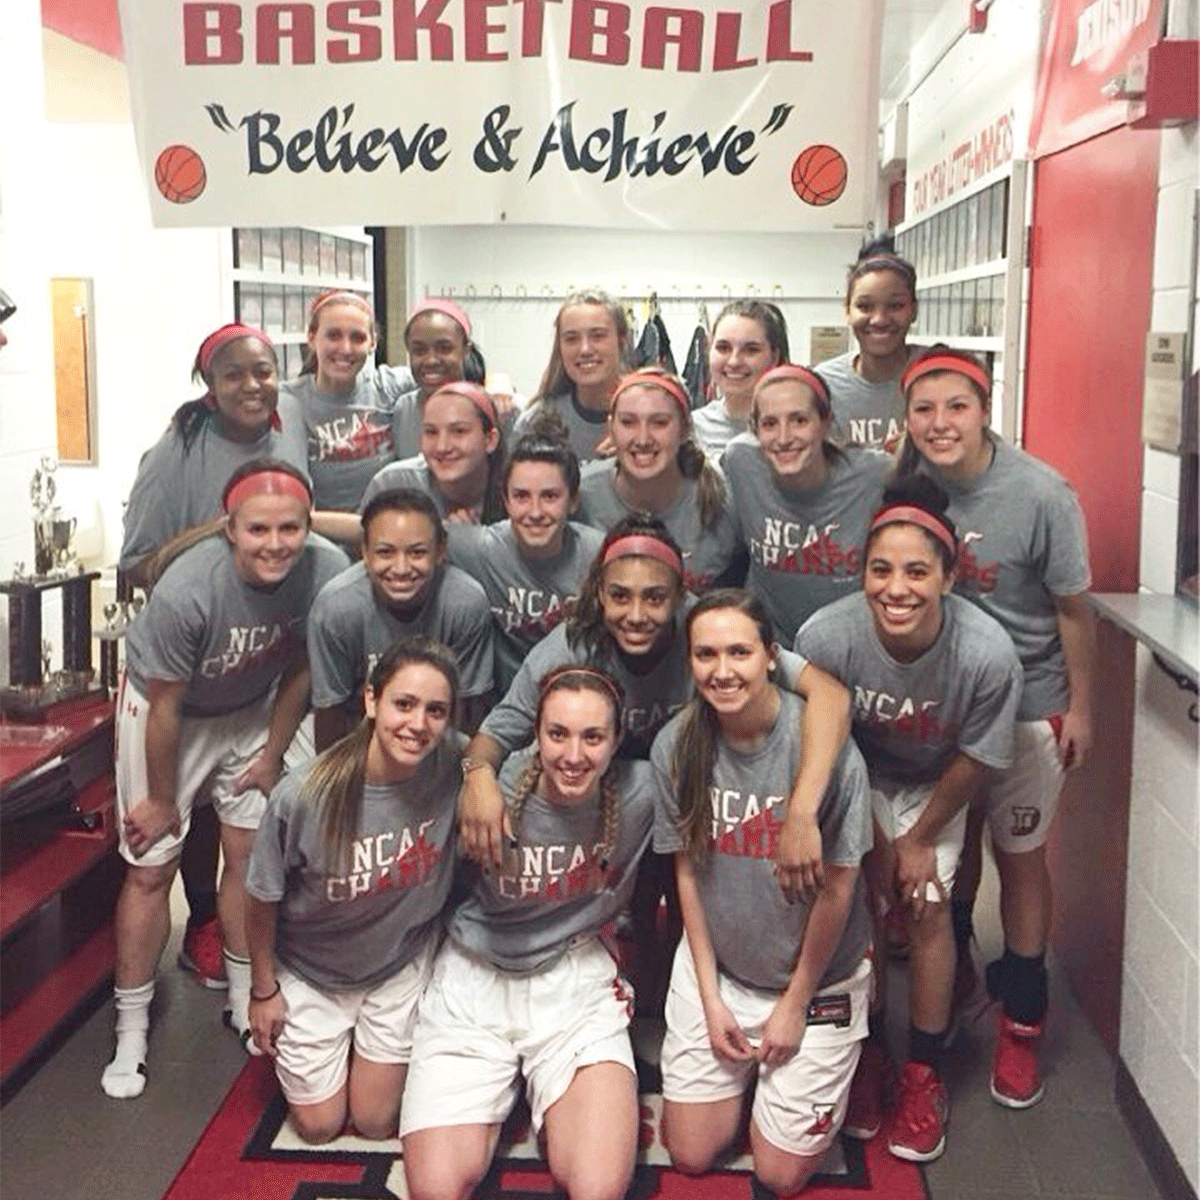 Photo of the 2015-16 Champion Big Red women's basketball team